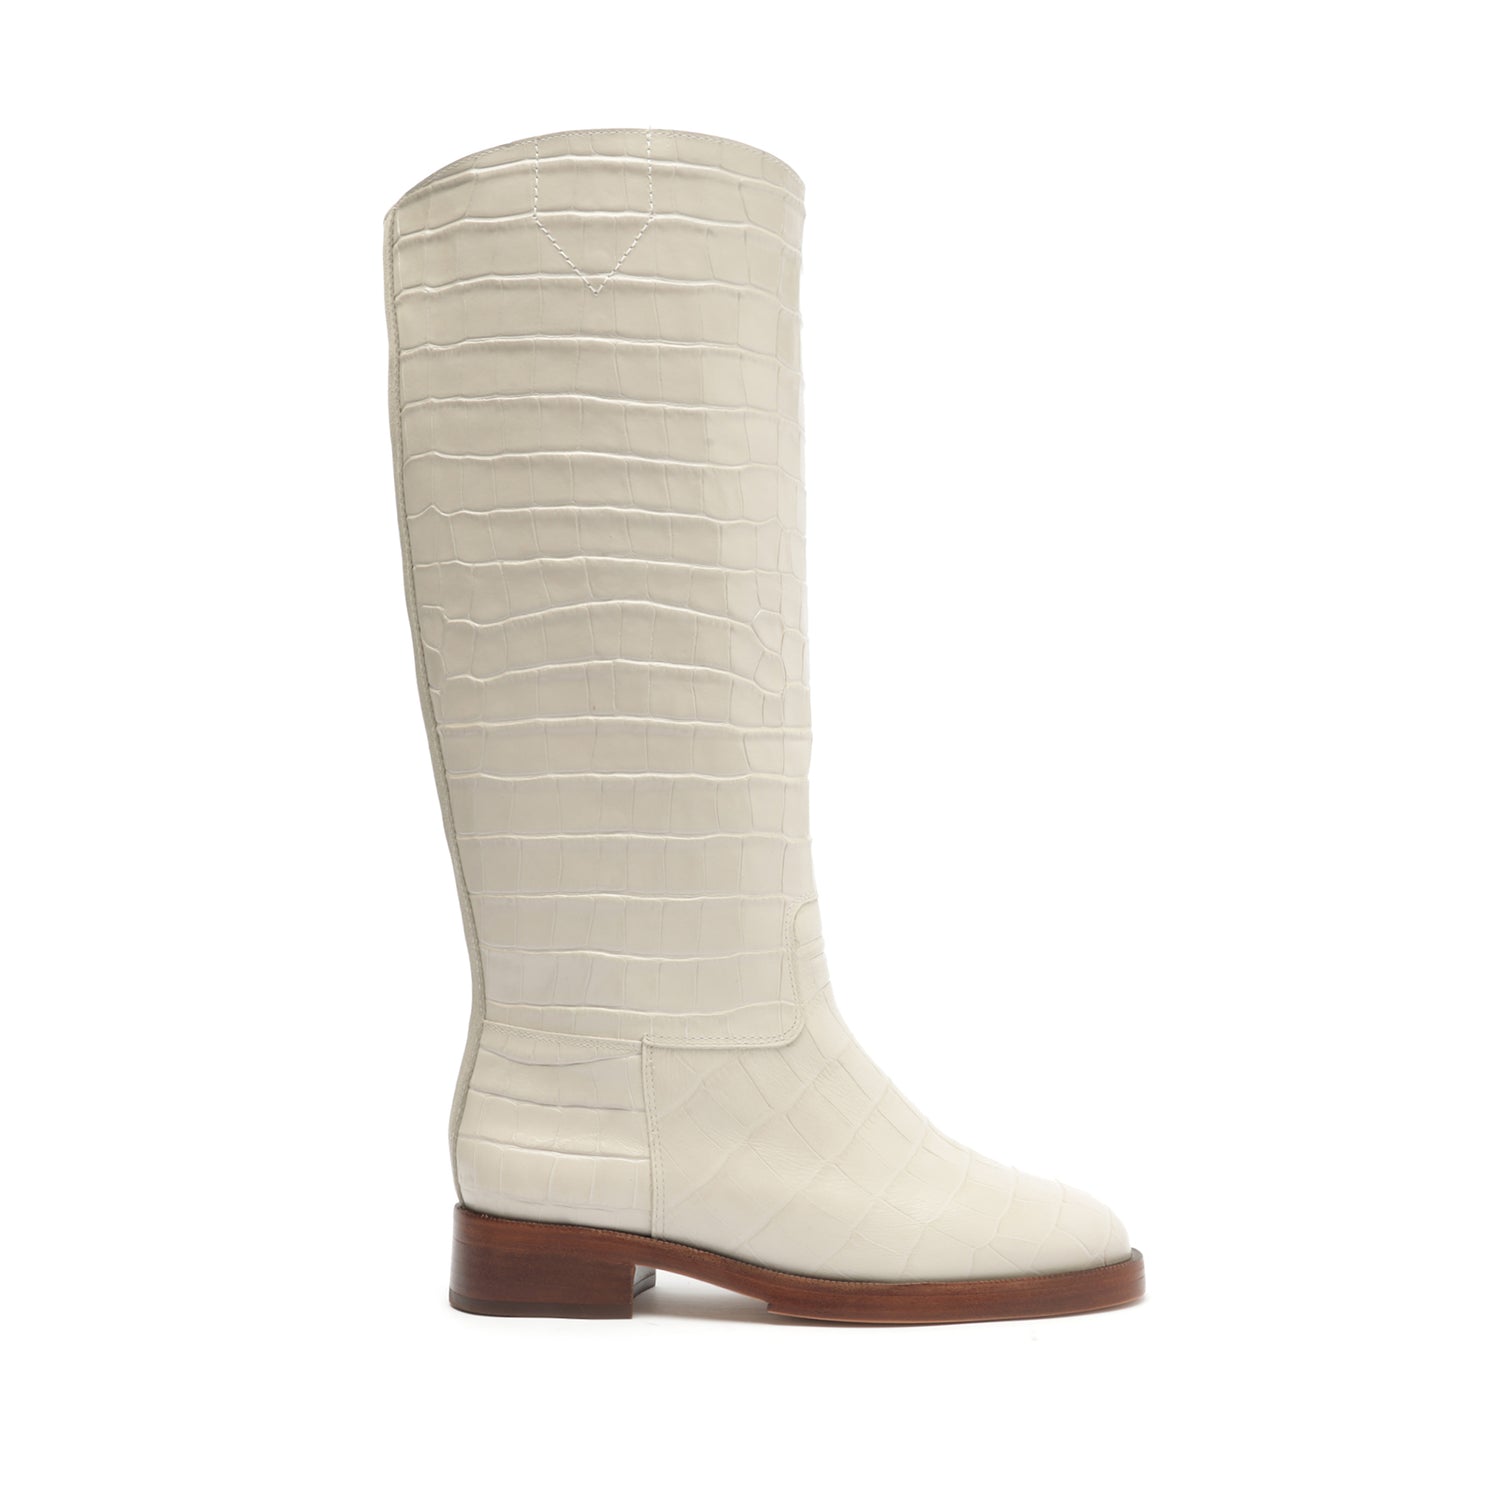 Schutz Terrance Up Leather Boot 7.5 - Cream - Leather